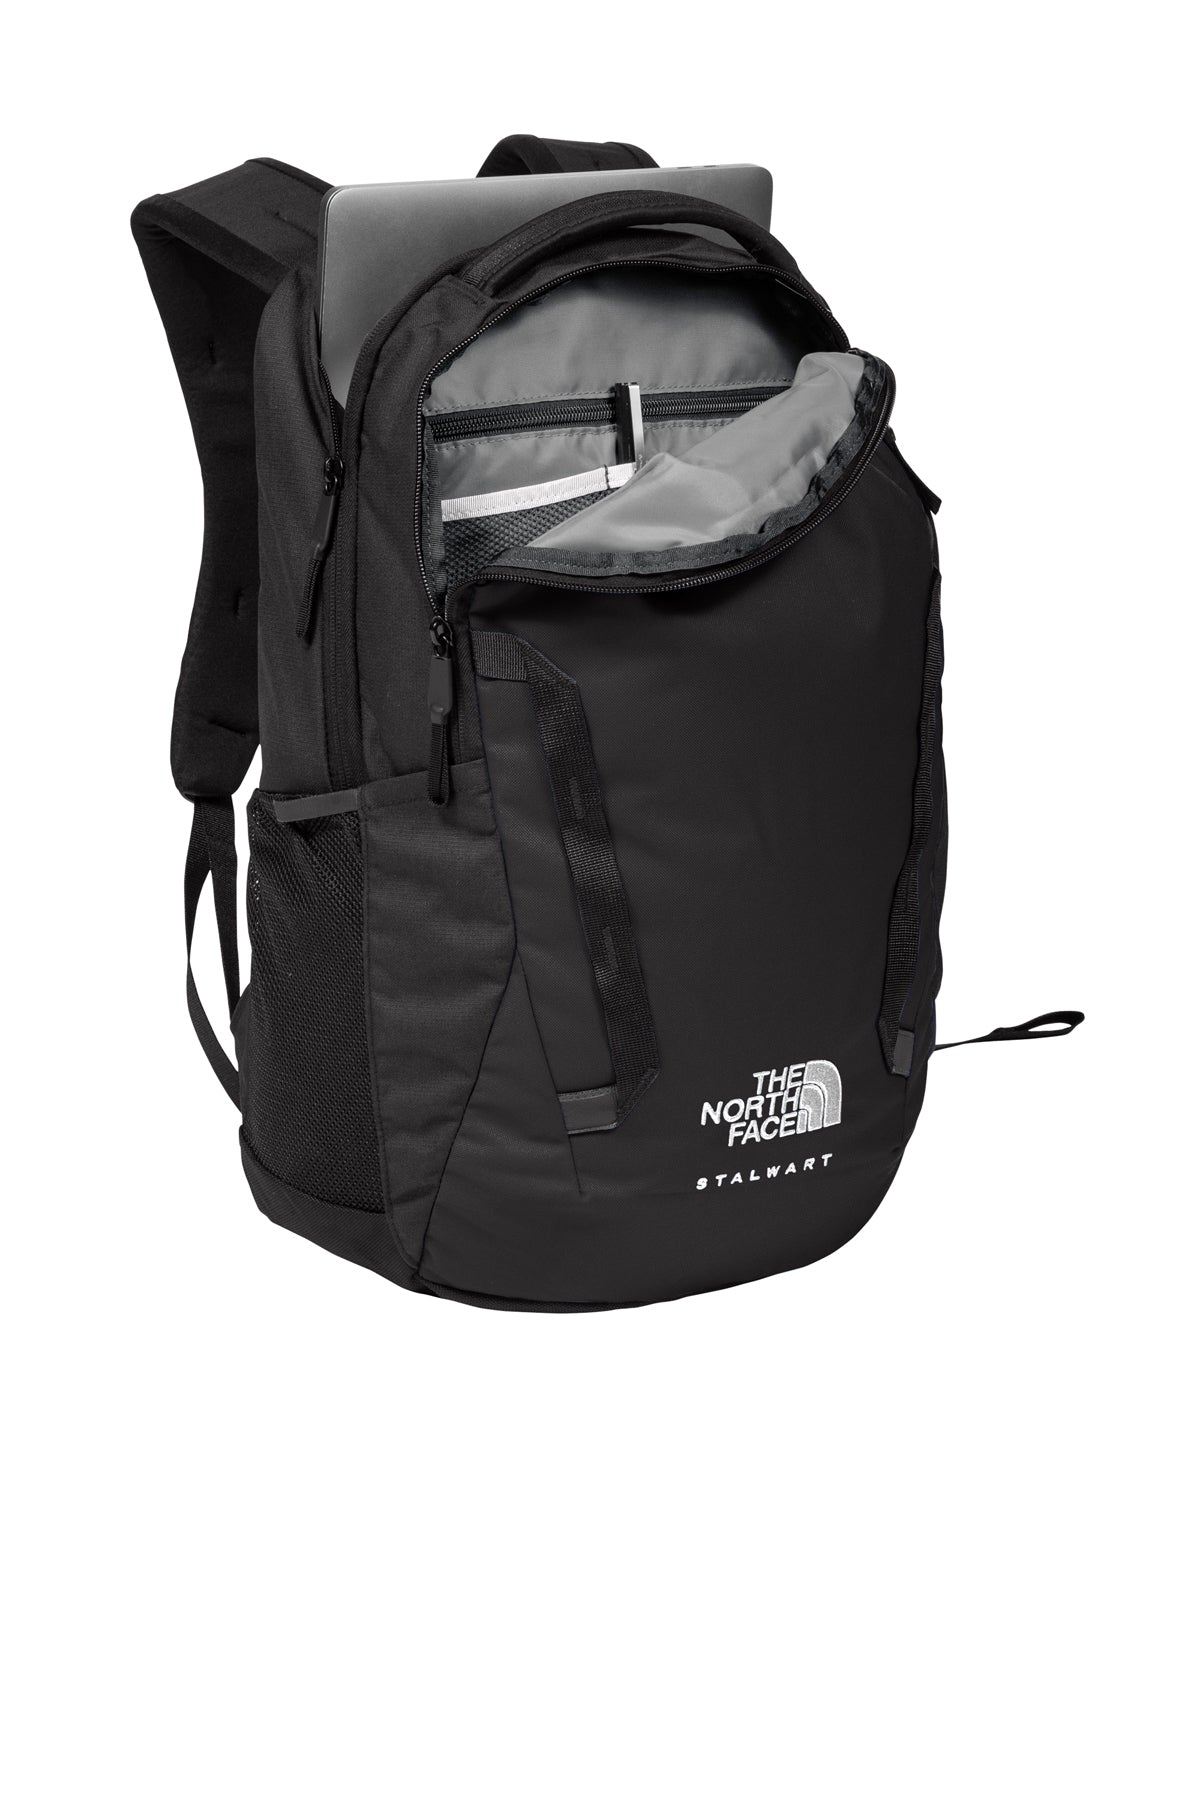 The North Face Stalwart Backpack-10